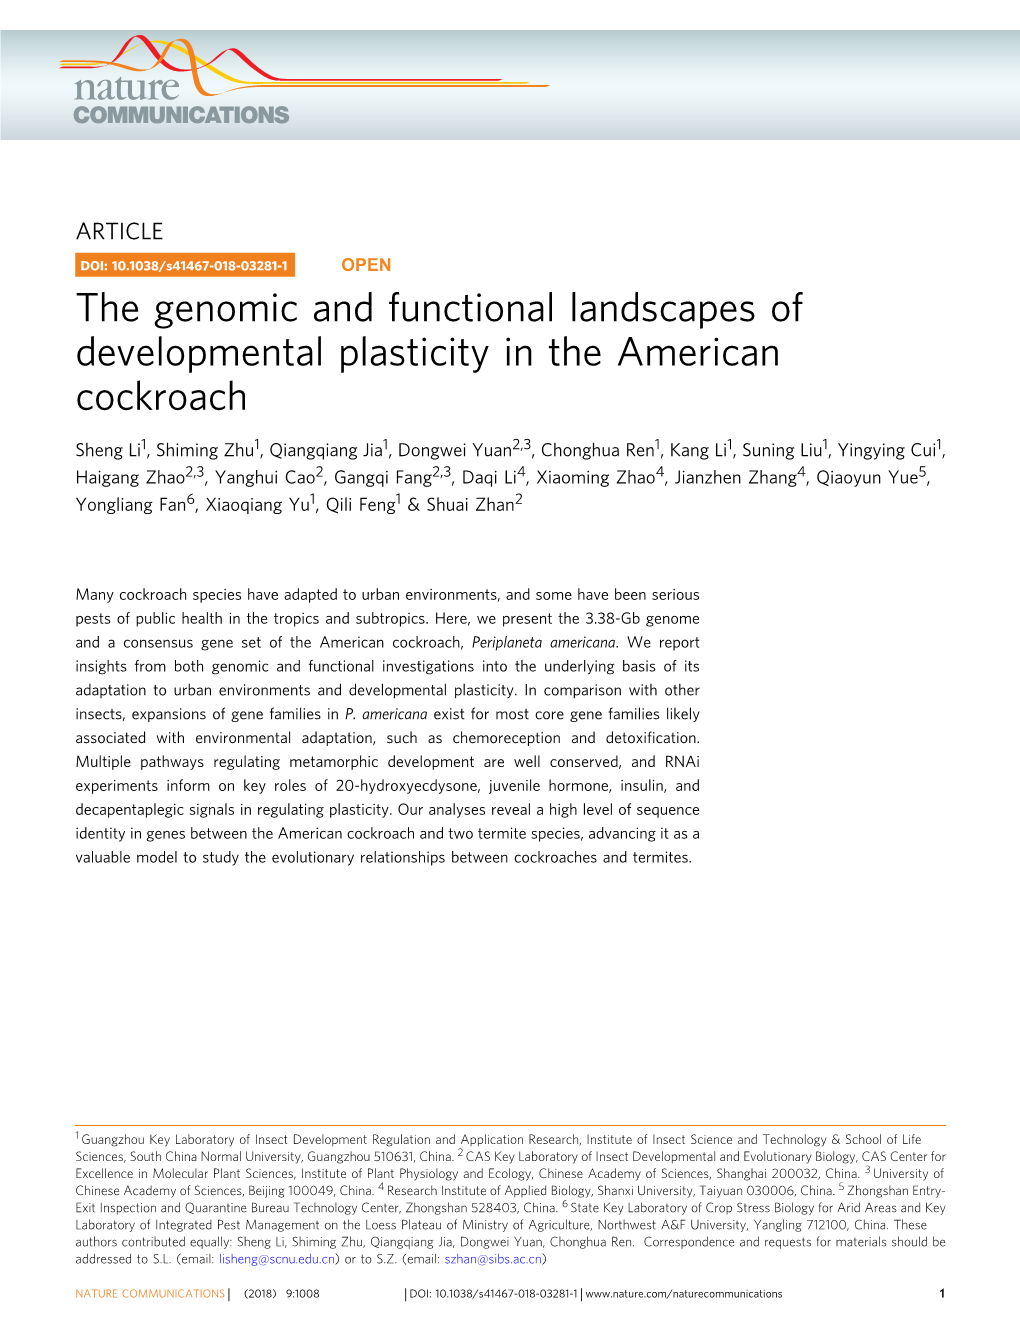 The Genomic and Functional Landscapes of Developmental Plasticity in the American Cockroach